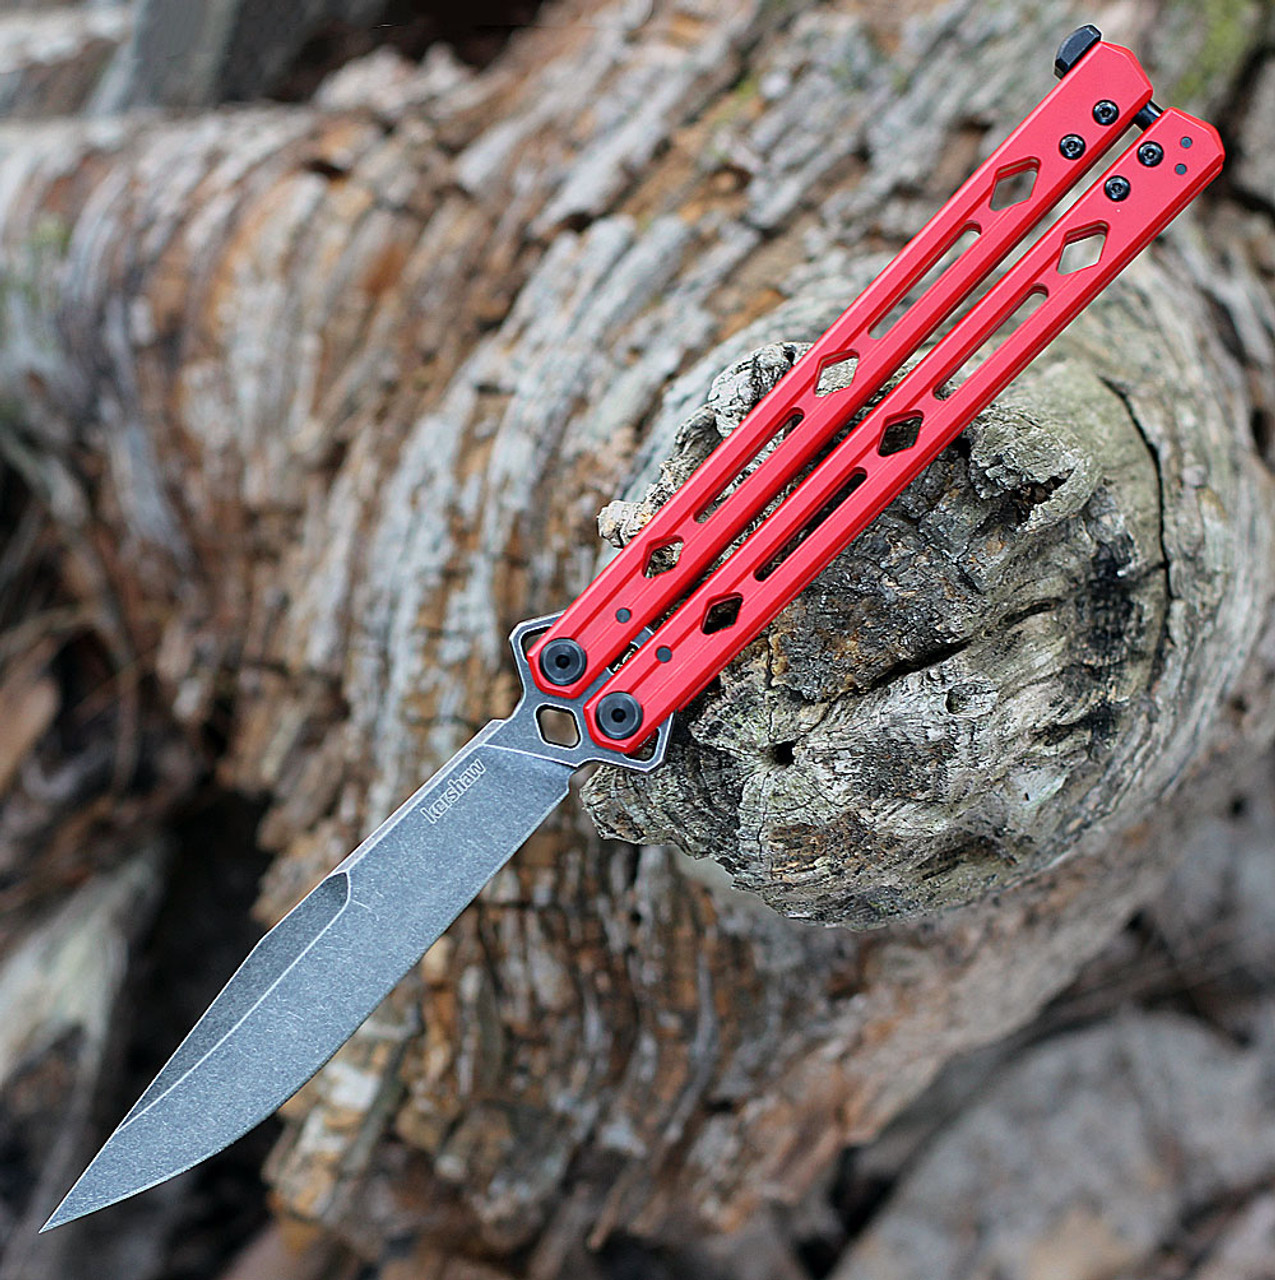 Kershaw Lucha Balisong Butterfly - Red Stainless (4.6" 14C28N BW) 5150RDBW